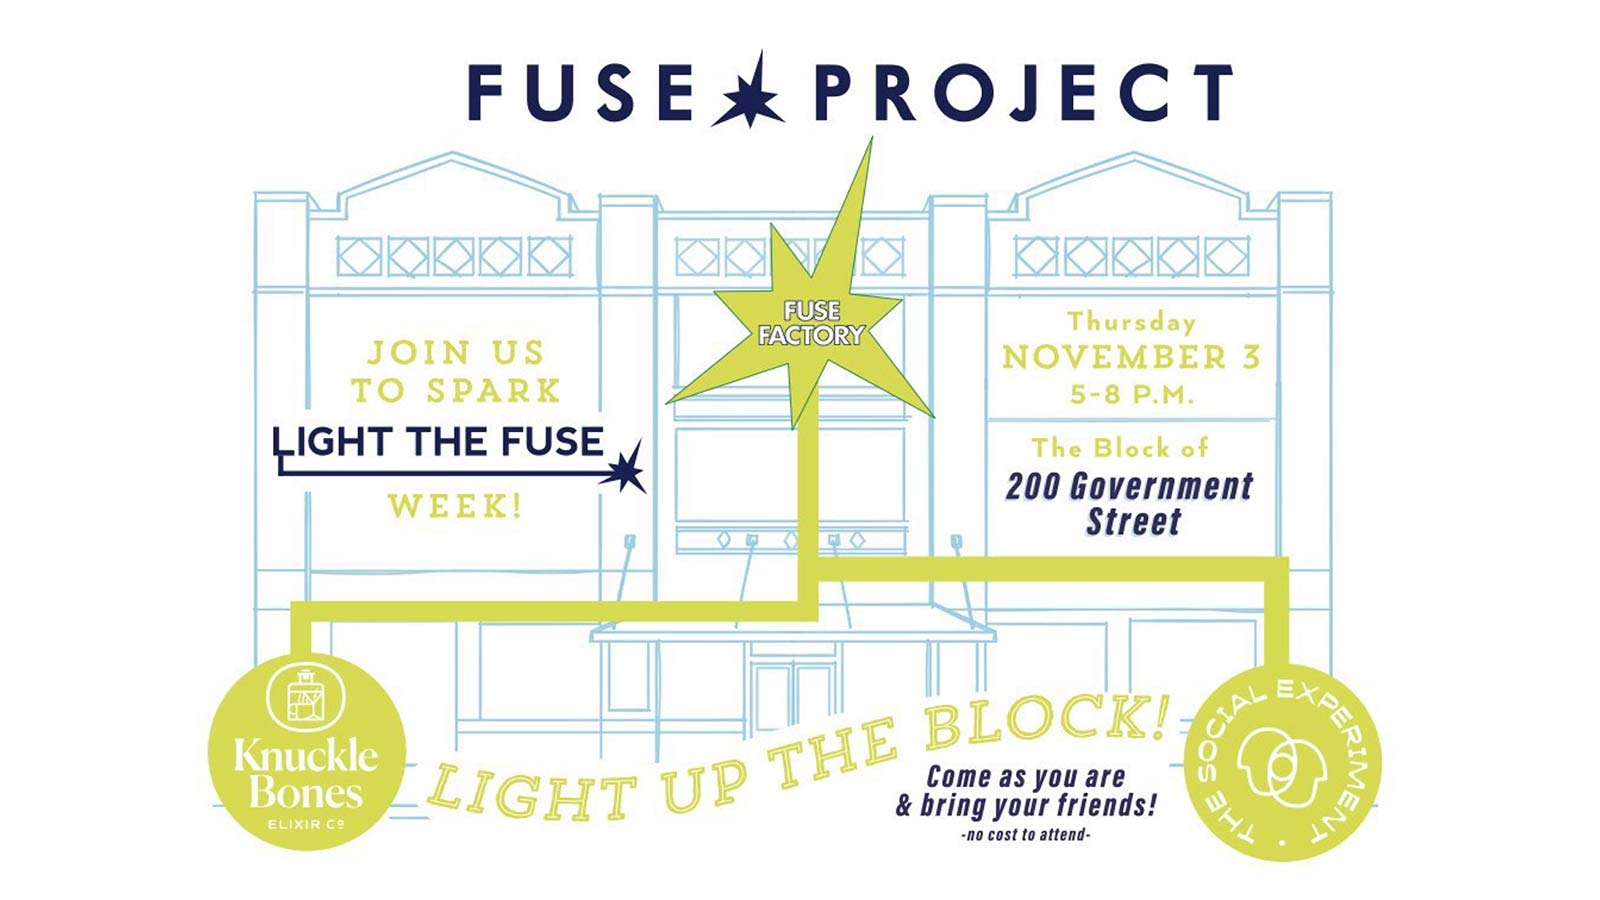 Fuse Project Campaign Starts Next Week